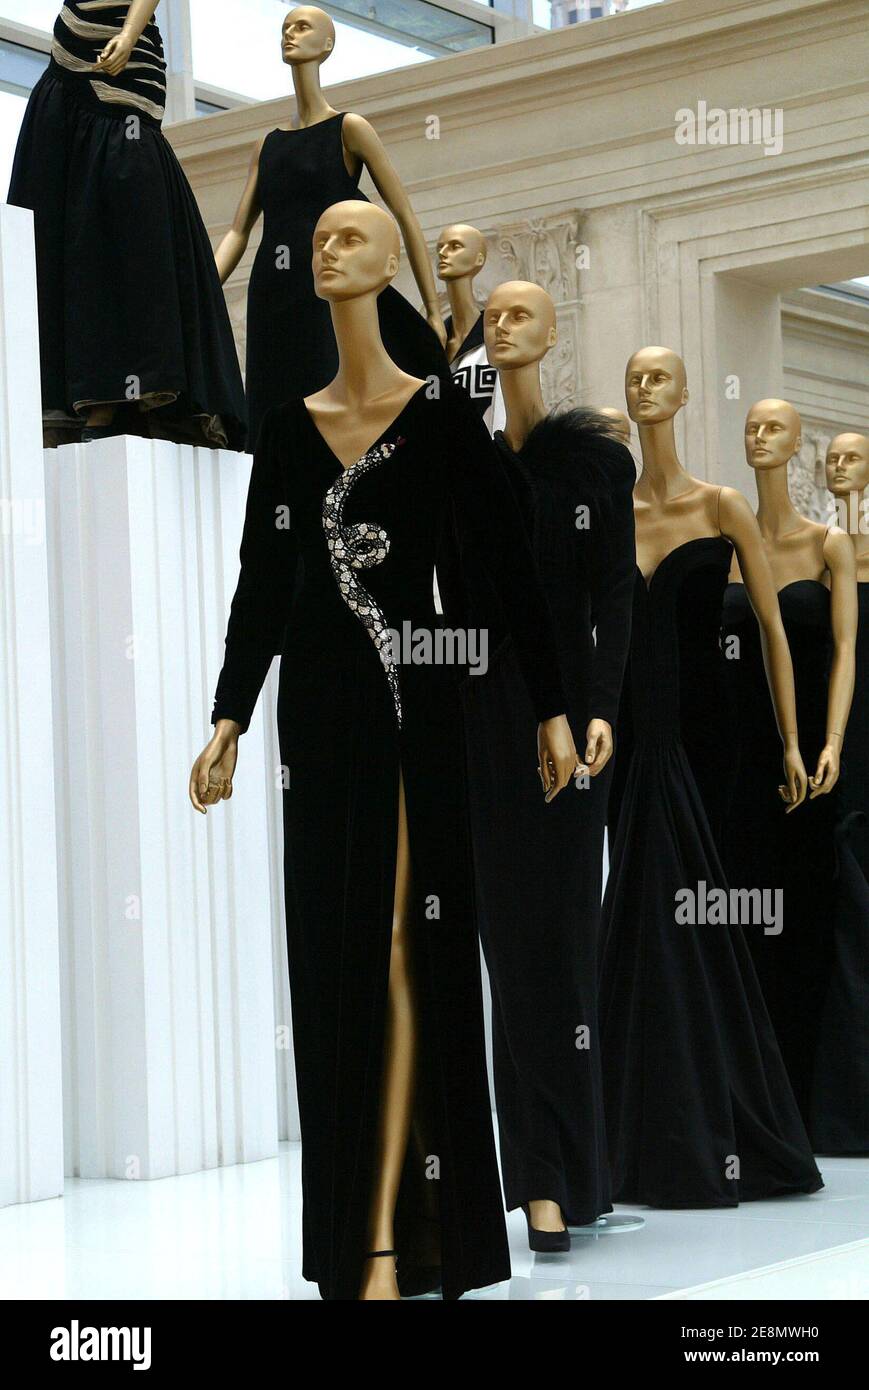 Valentino creations are at the Valentino's 45 Years Fashion exhibition celebrating the 45th Anniversary of the Valentino fashion house, at the Ara Pacis Museum in Rome, Italy on July 6,